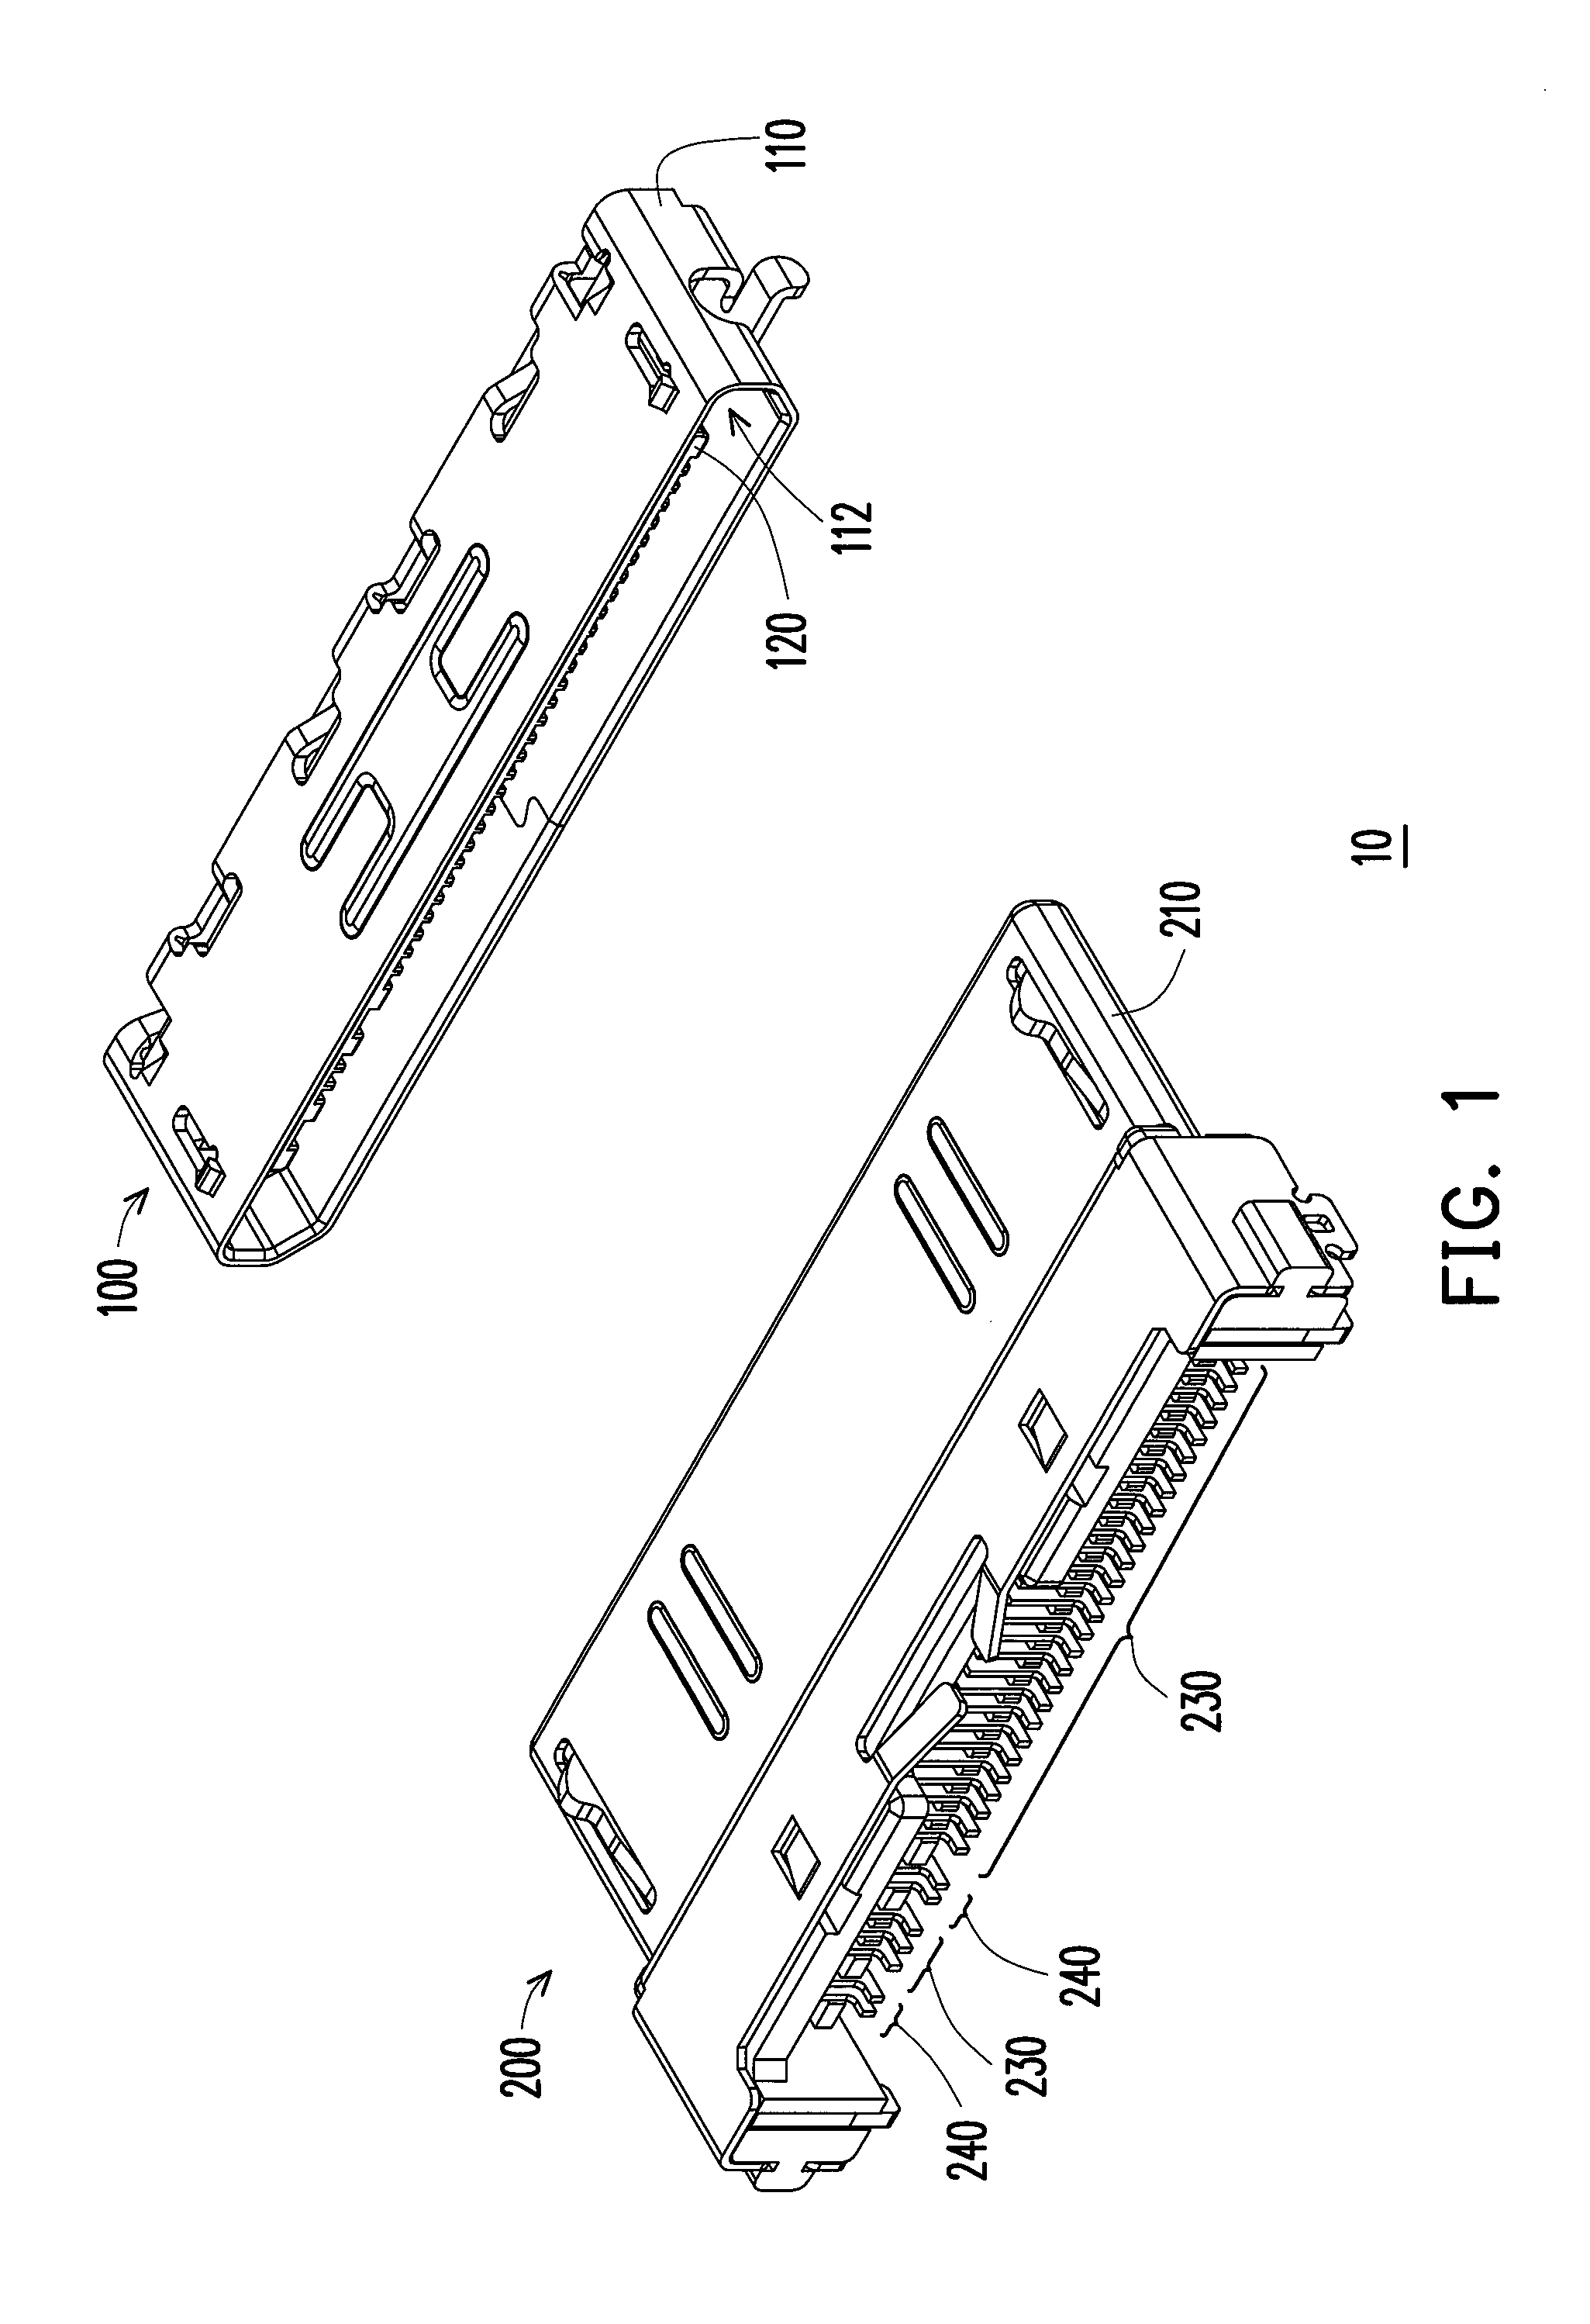 Socket connector, plug connector, connector assembly, and handheld electronic device